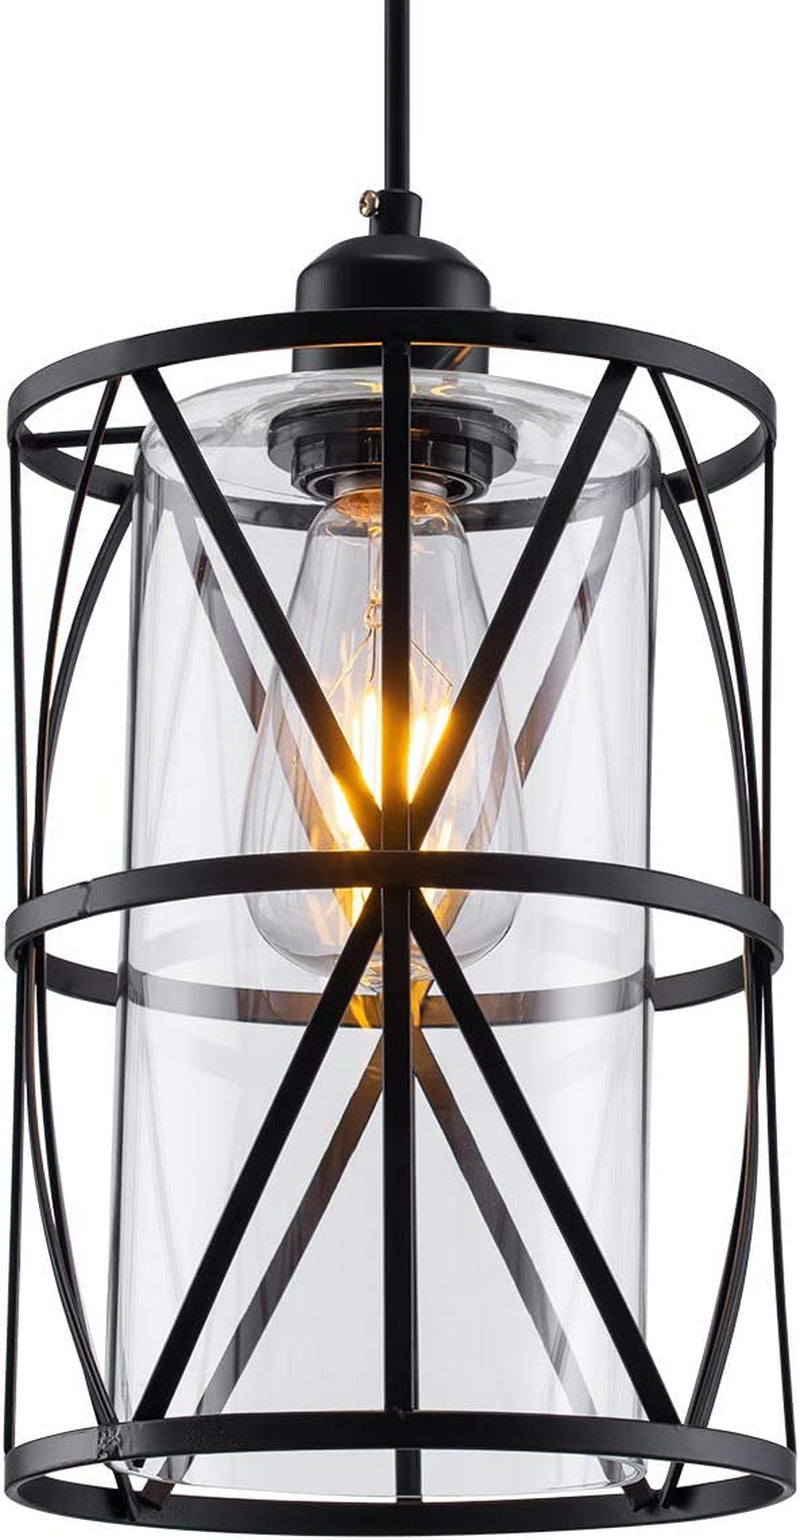 SHENGQINGTOP Black Industrial Metal Pendant Light, Cylindrical Pendant Light with Clear Glass Shade, New Transitional Hanging Lighting Fixture for Kitchen Island Counter Dining Room Bedroom Restaurant Home & Garden > Lighting > Lighting Fixtures SHENGQINGTOP Black  